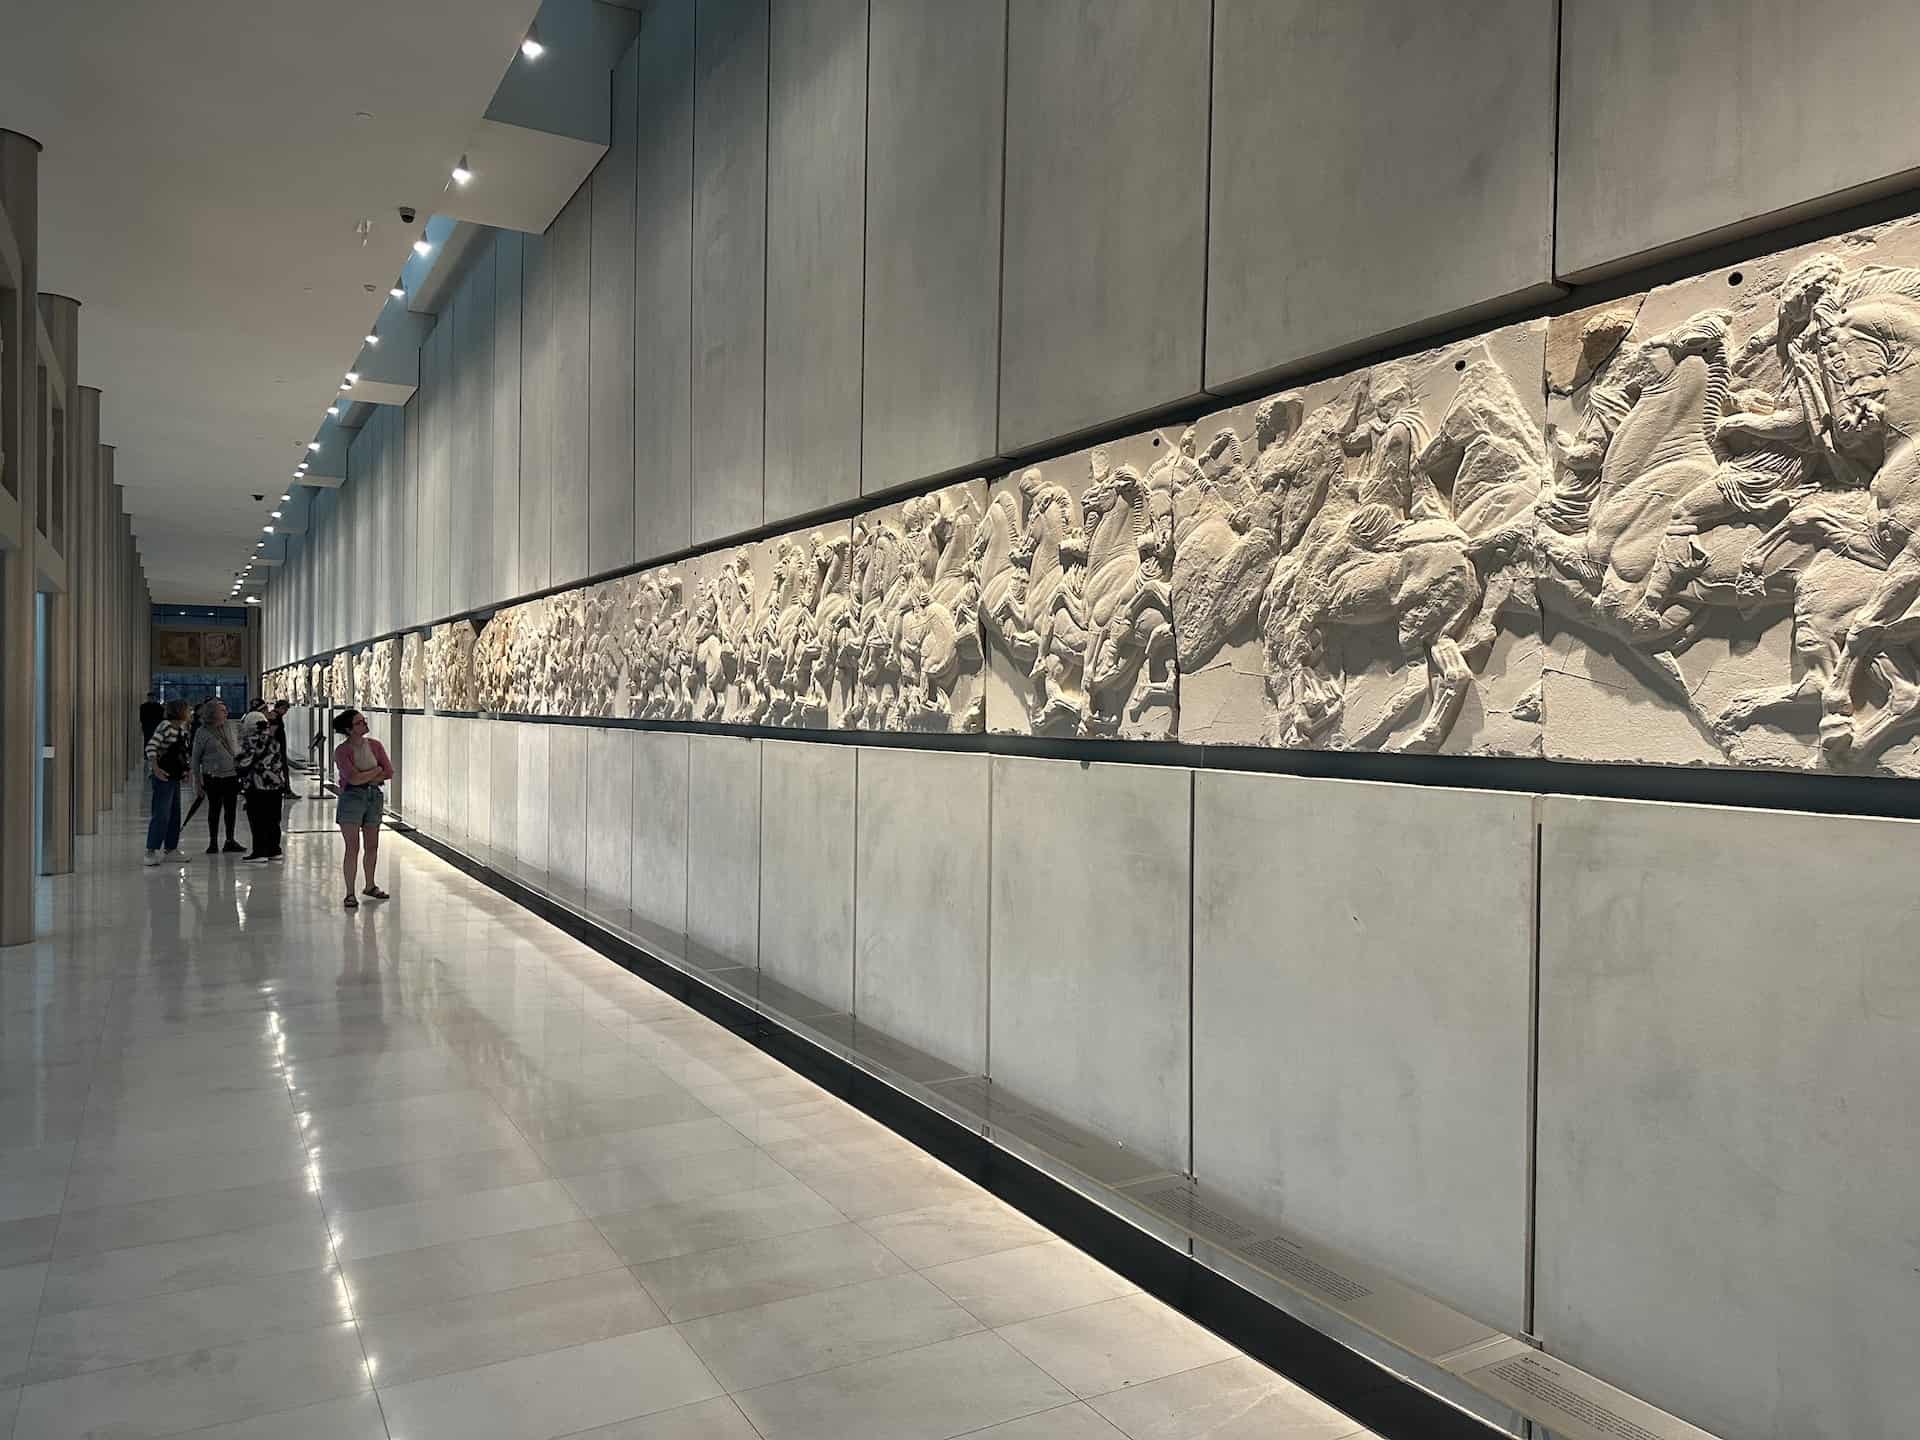 North frieze of the Parthenon at the Acropolis Museum in Athens, Greece